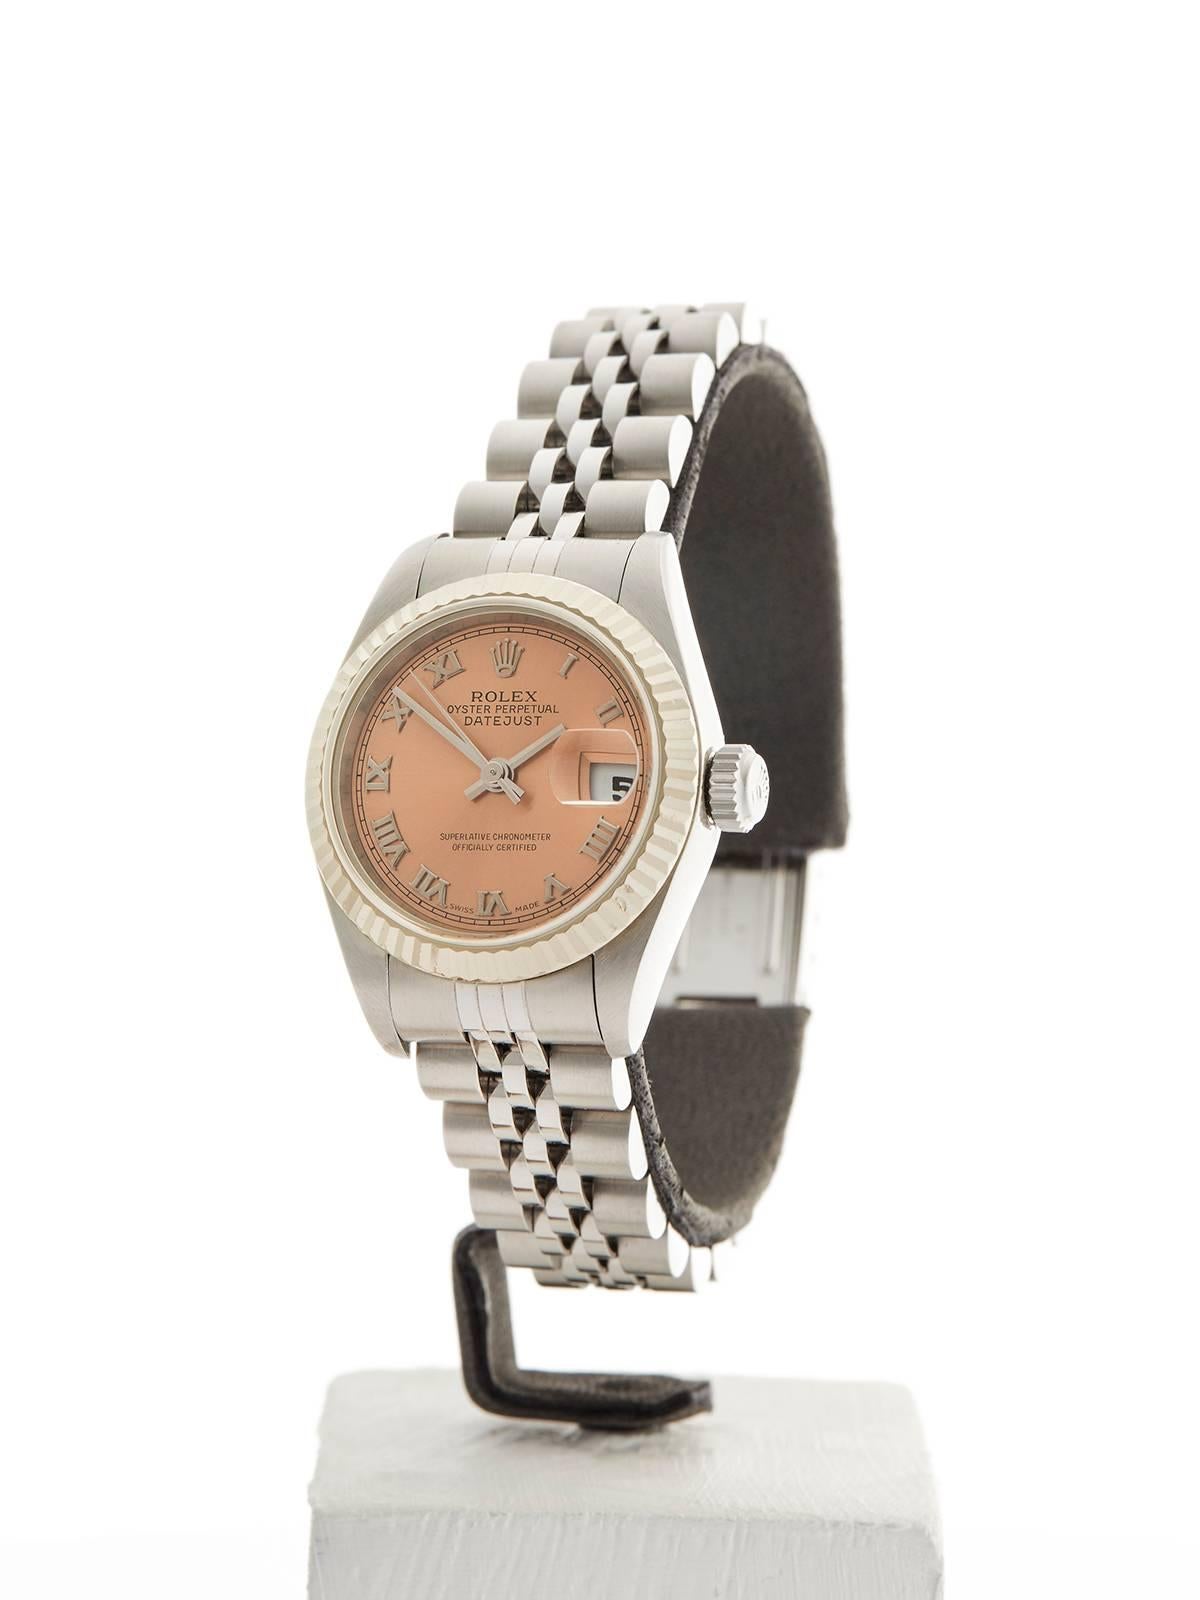 REF	W3596
MODEL NUMBER	79174
SERIAL NUMBER	A74****
CONDITION	9 - Excellent condition
GENDER	Ladies
AGE	1999
CASE DIAMETER	26 mm
CASE SIZE	26mm
BOX & PAPERS	Box Only
MOVEMENT	Automatic
CASE	Stainless steel/18k white gold
DIAL	Pink